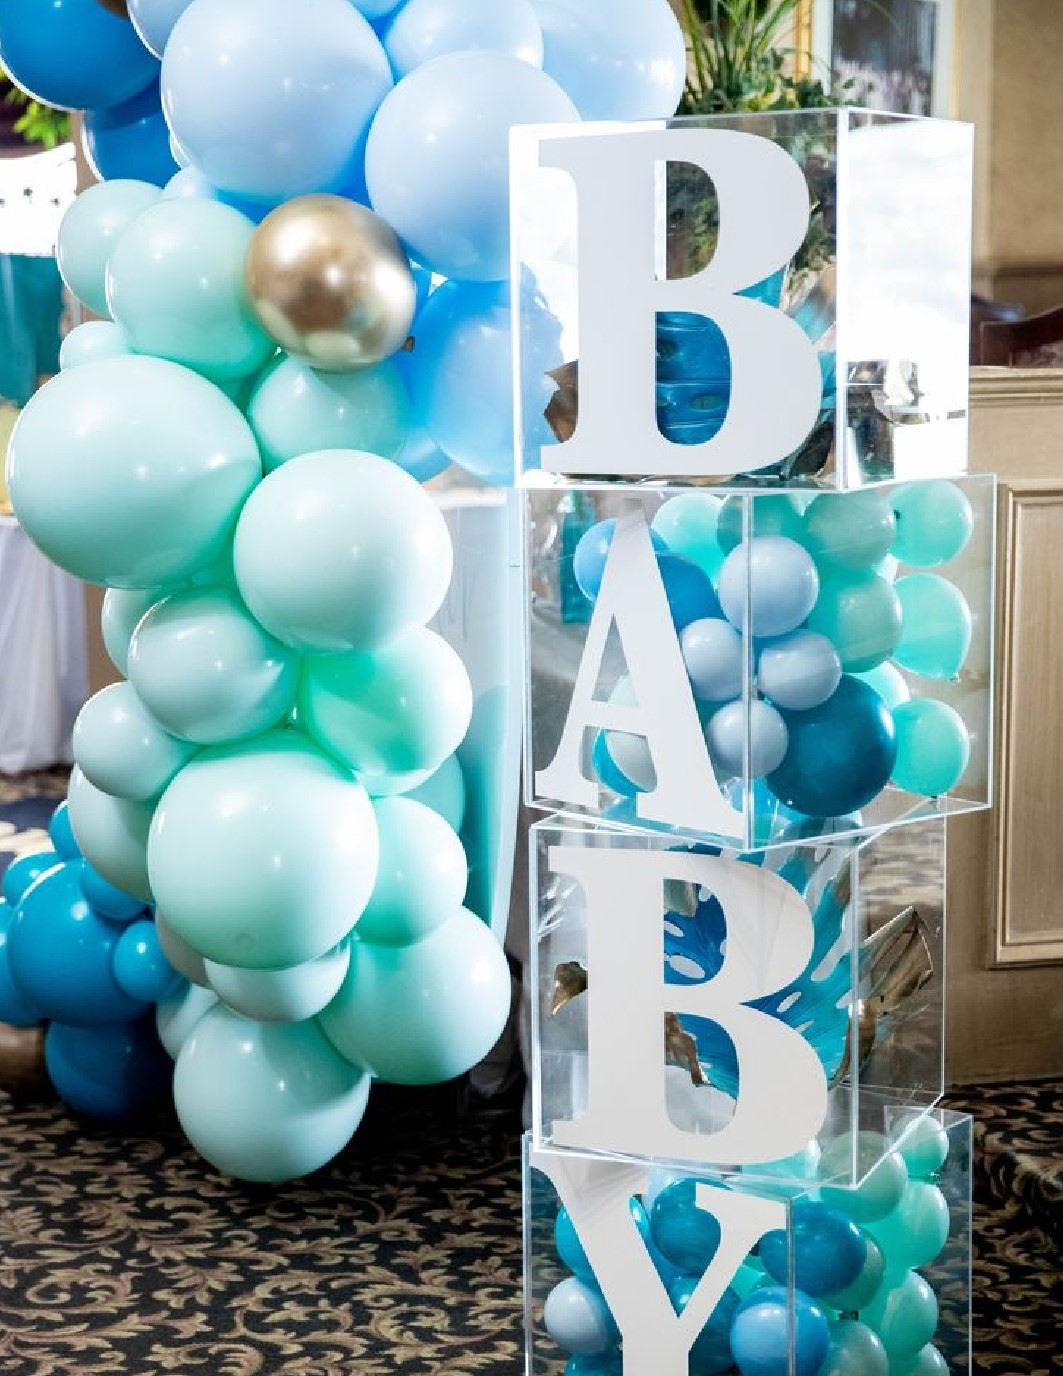 Acrylic Box For Party Balloons 25 x 25 x 25 cm